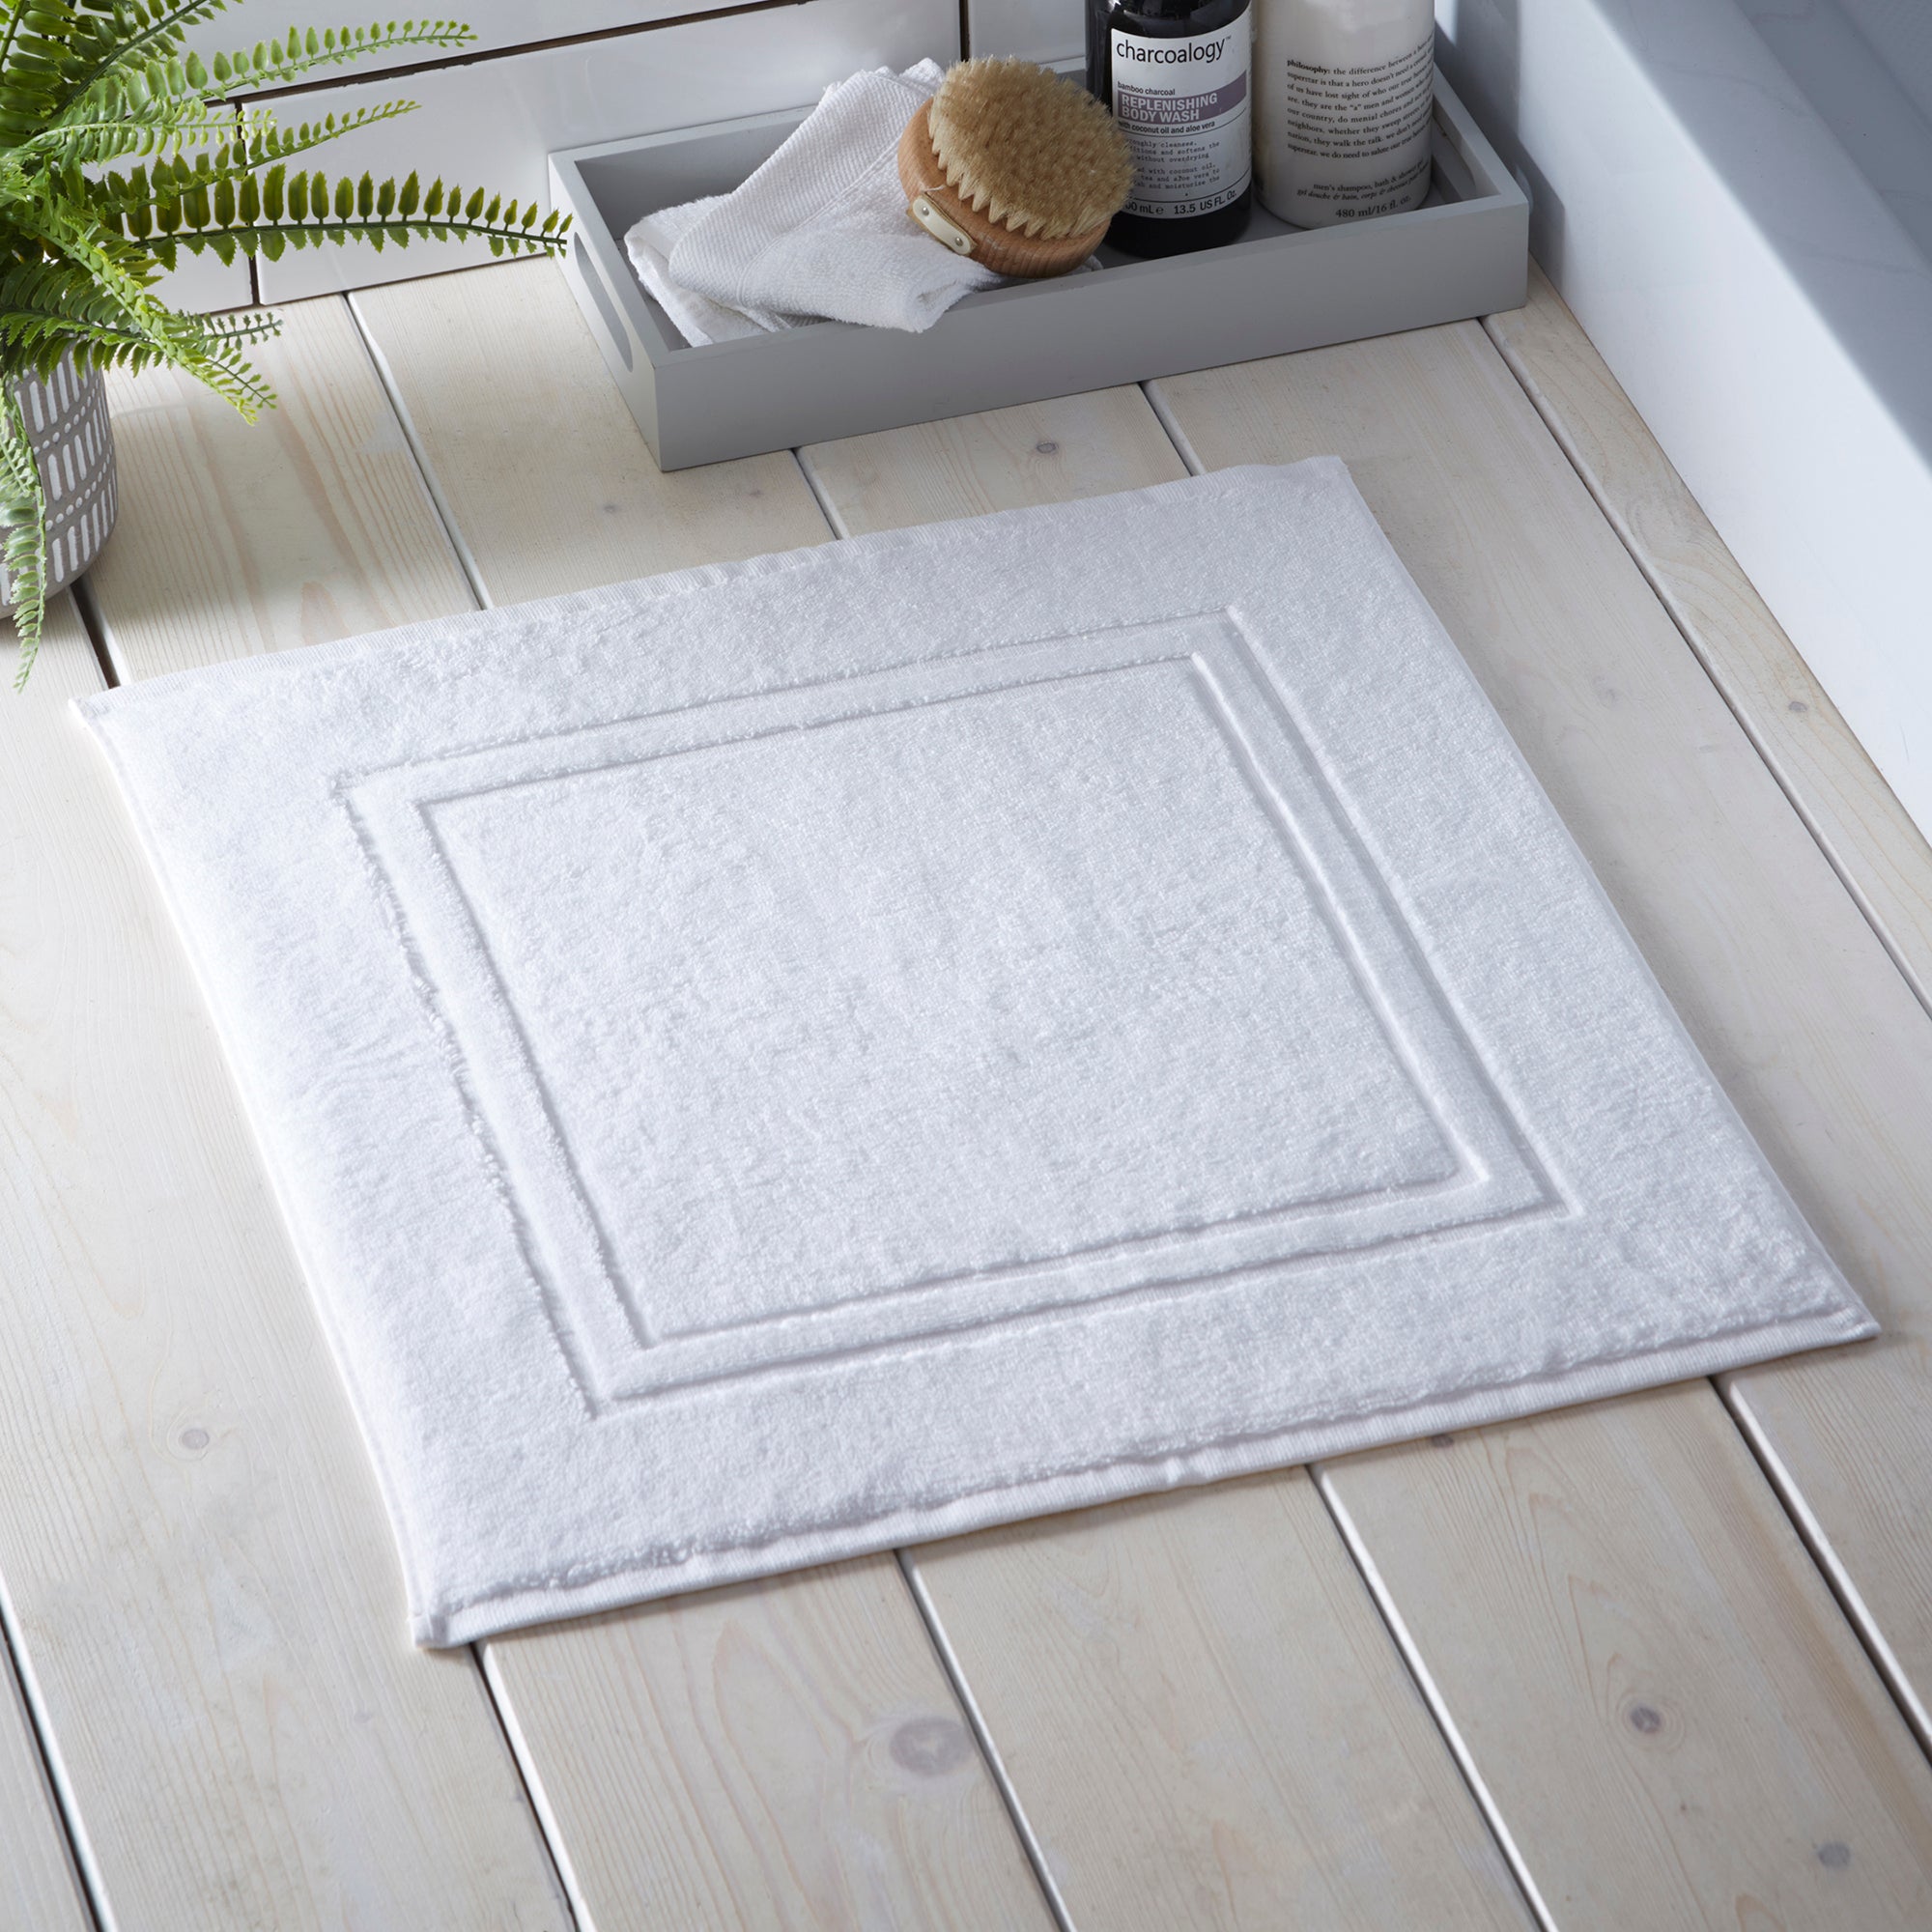 Shower Mat Abode Eco by Drift Home in White